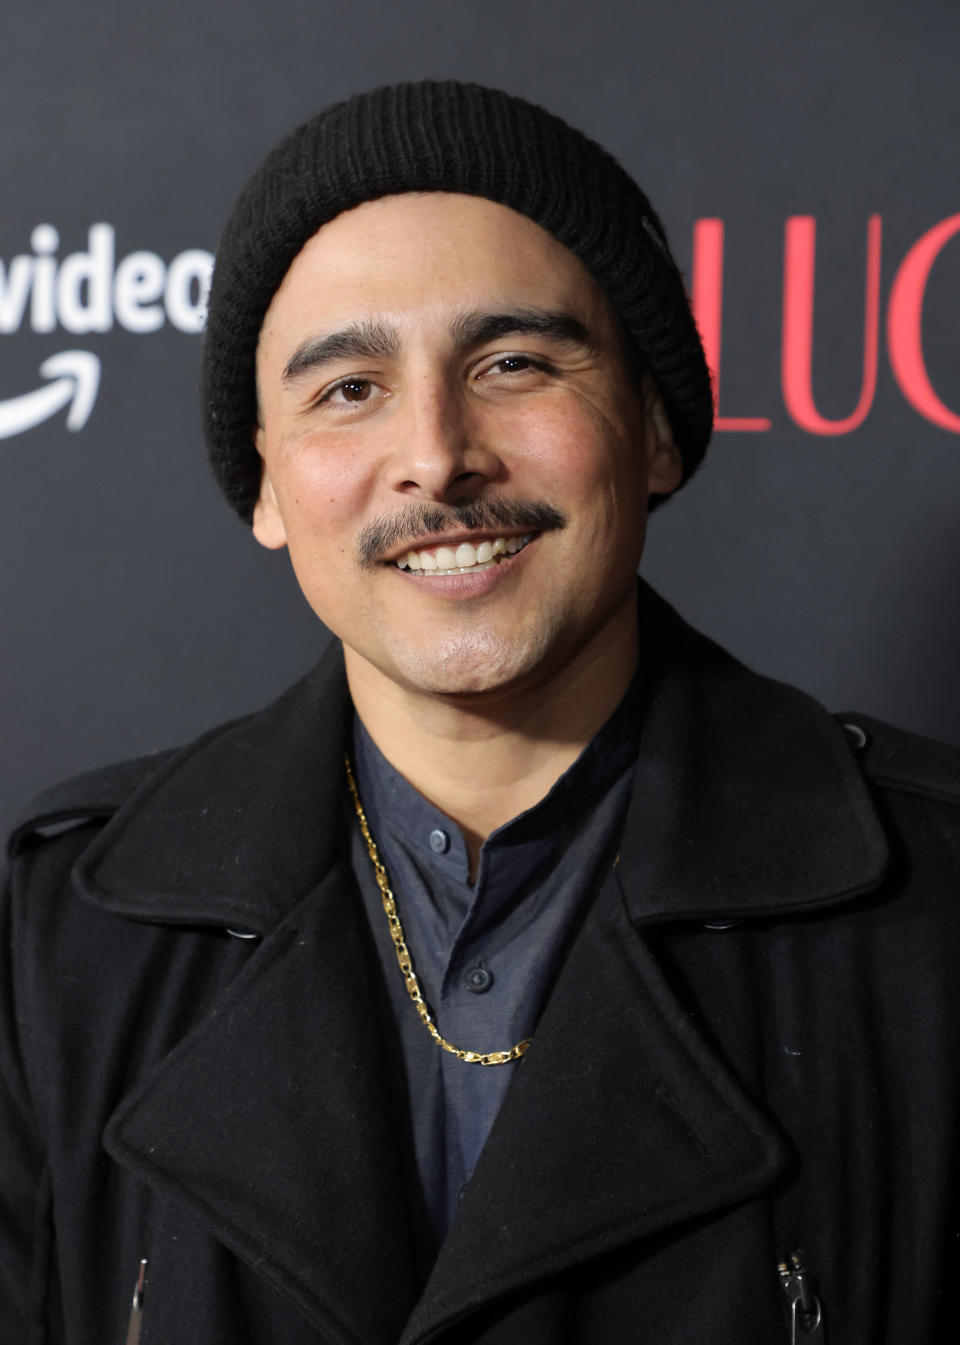 Robert A. Martinez appears at the premiere of "Lucy and Desi" in February 2022